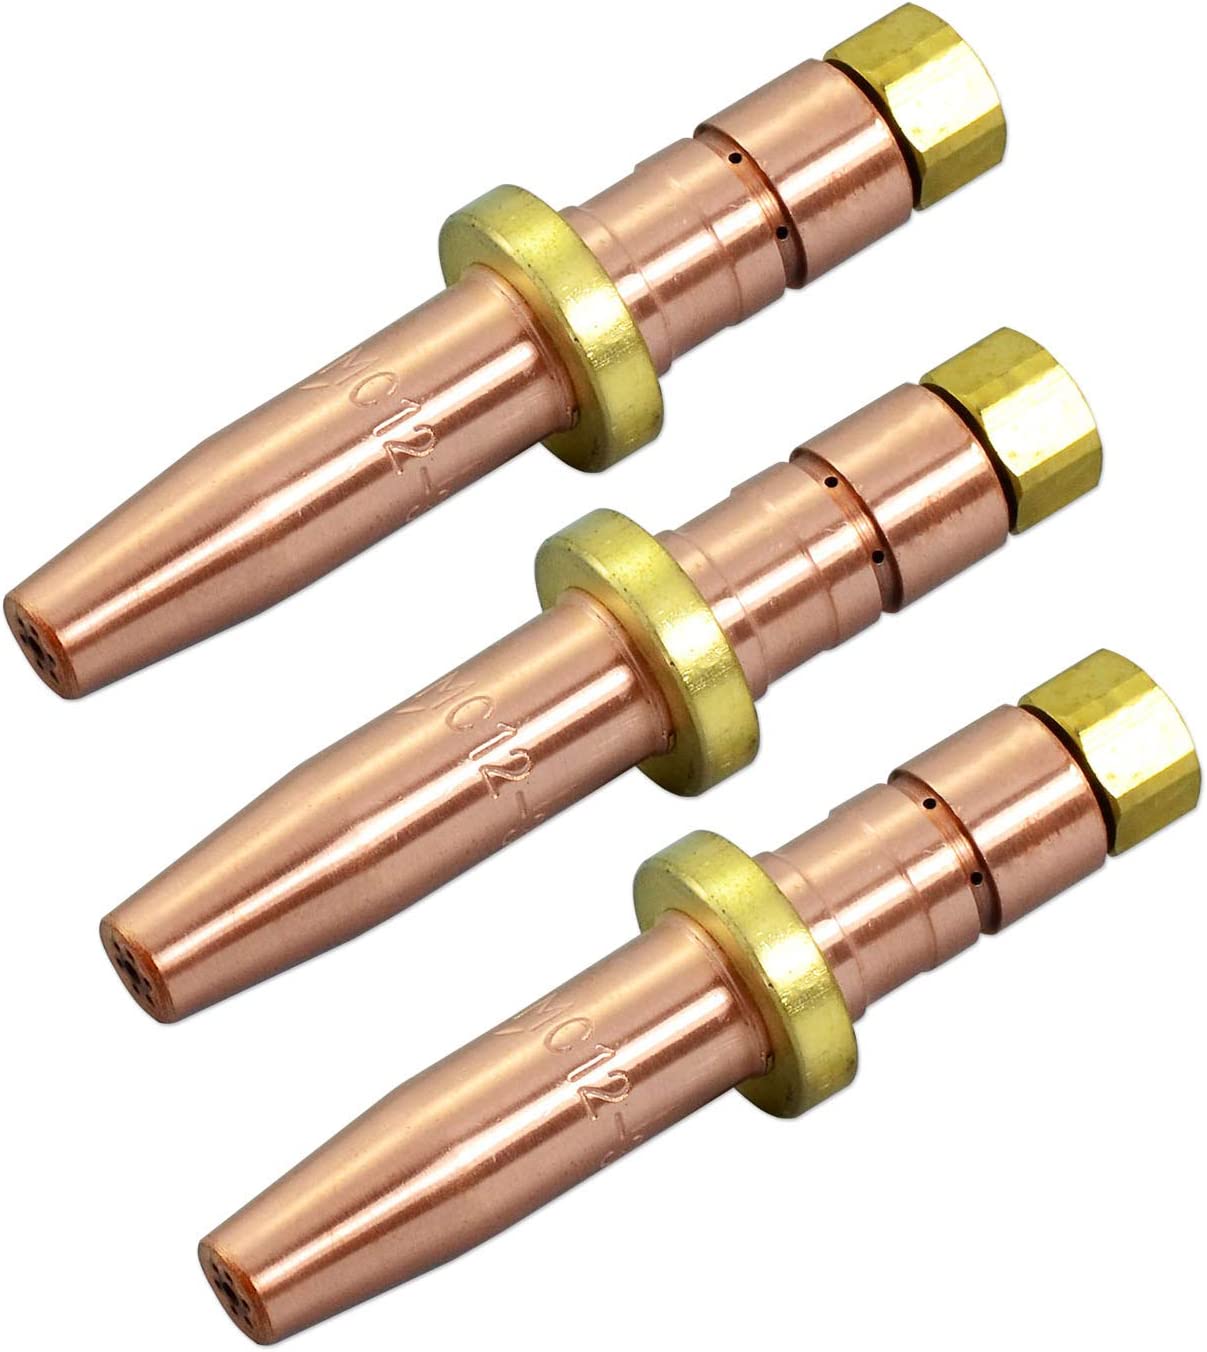 MC12-3 Acetylene Cutting Tip for Smith Torch 3PK 